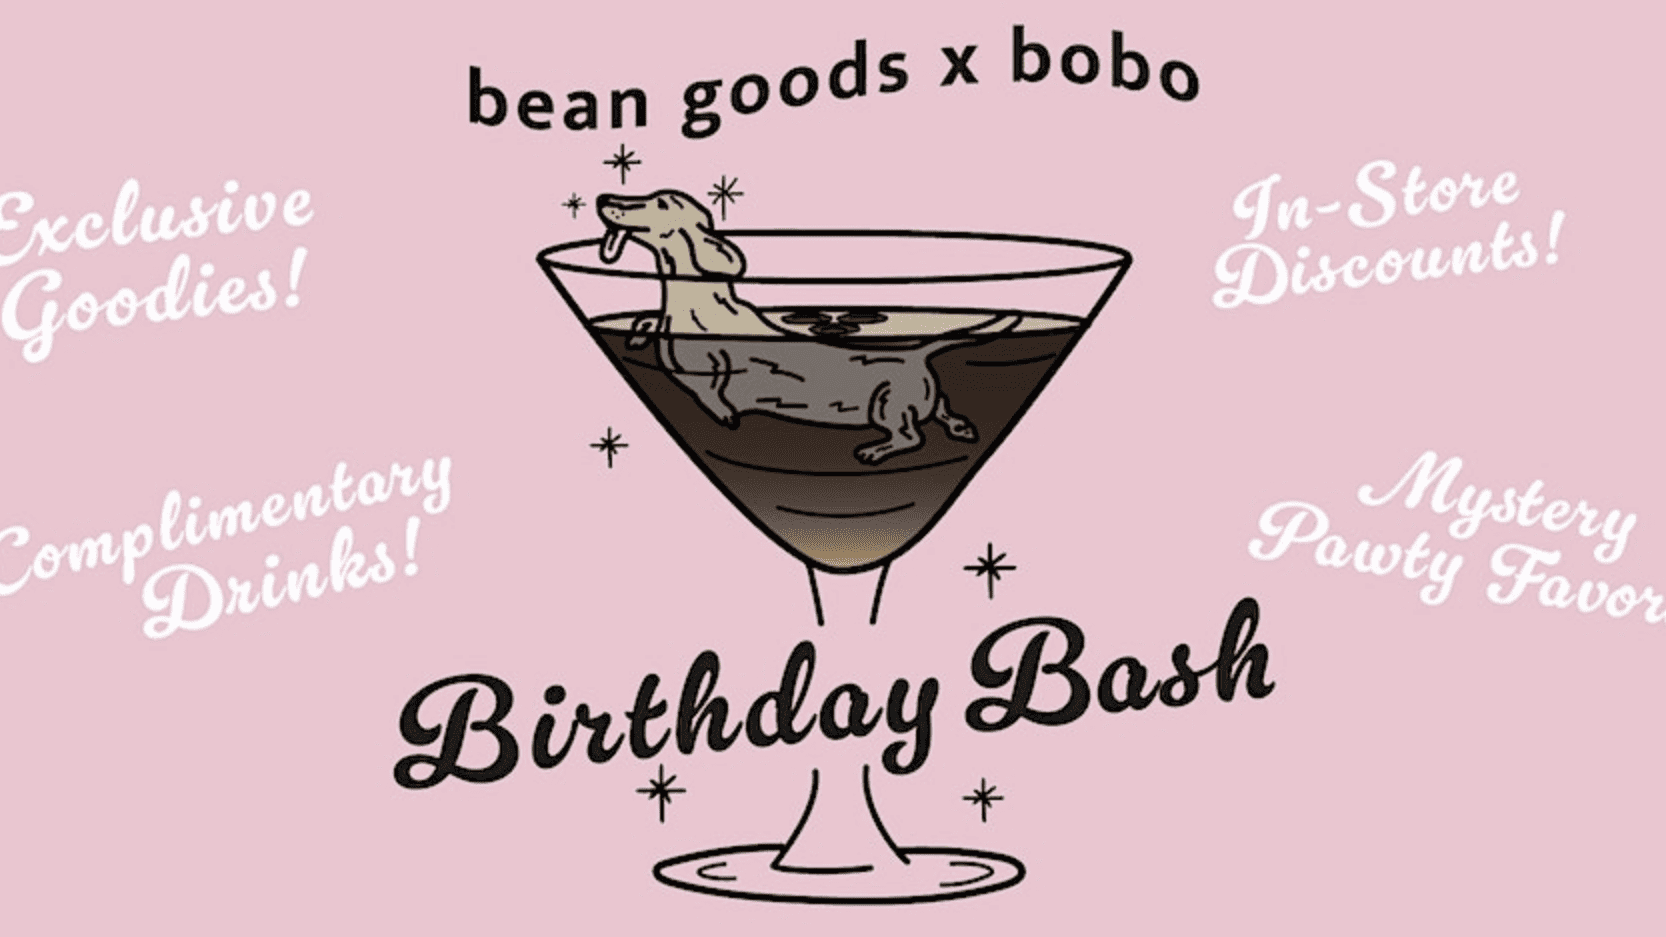 Bean Goods is teaming up with Bobo Palm Springs to throw the ultimate B-day Bash. Join us for a night of unforgettable fun and celebration at this exclusive event, where you can indulge in all - Dogtrekker